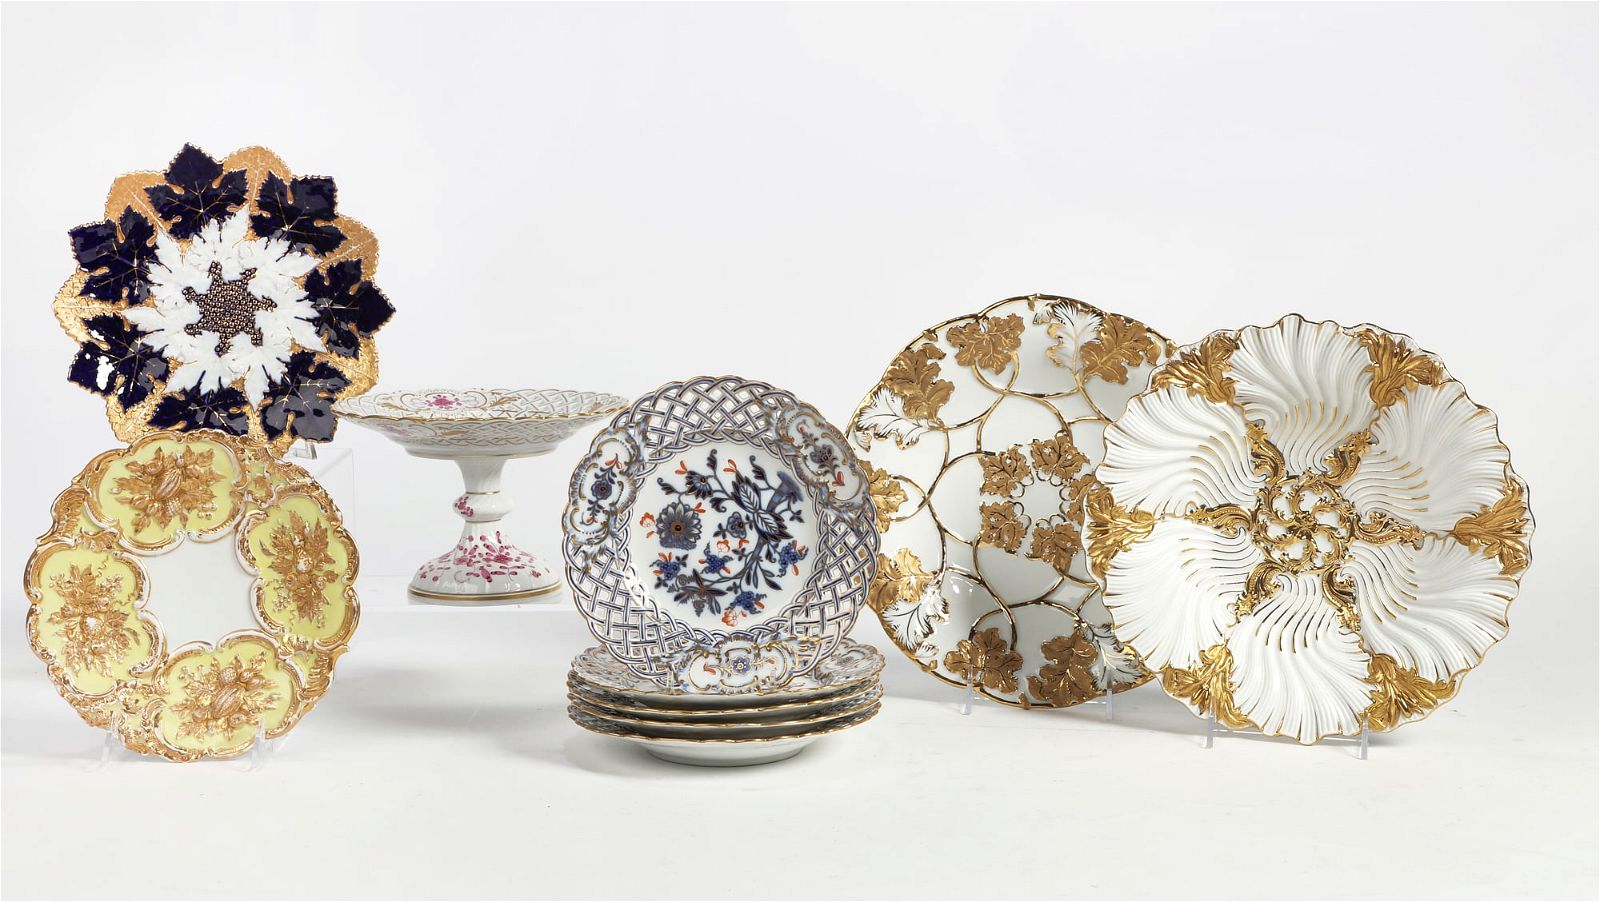 A COLLECTION OF MEISSEN PORCELAIN